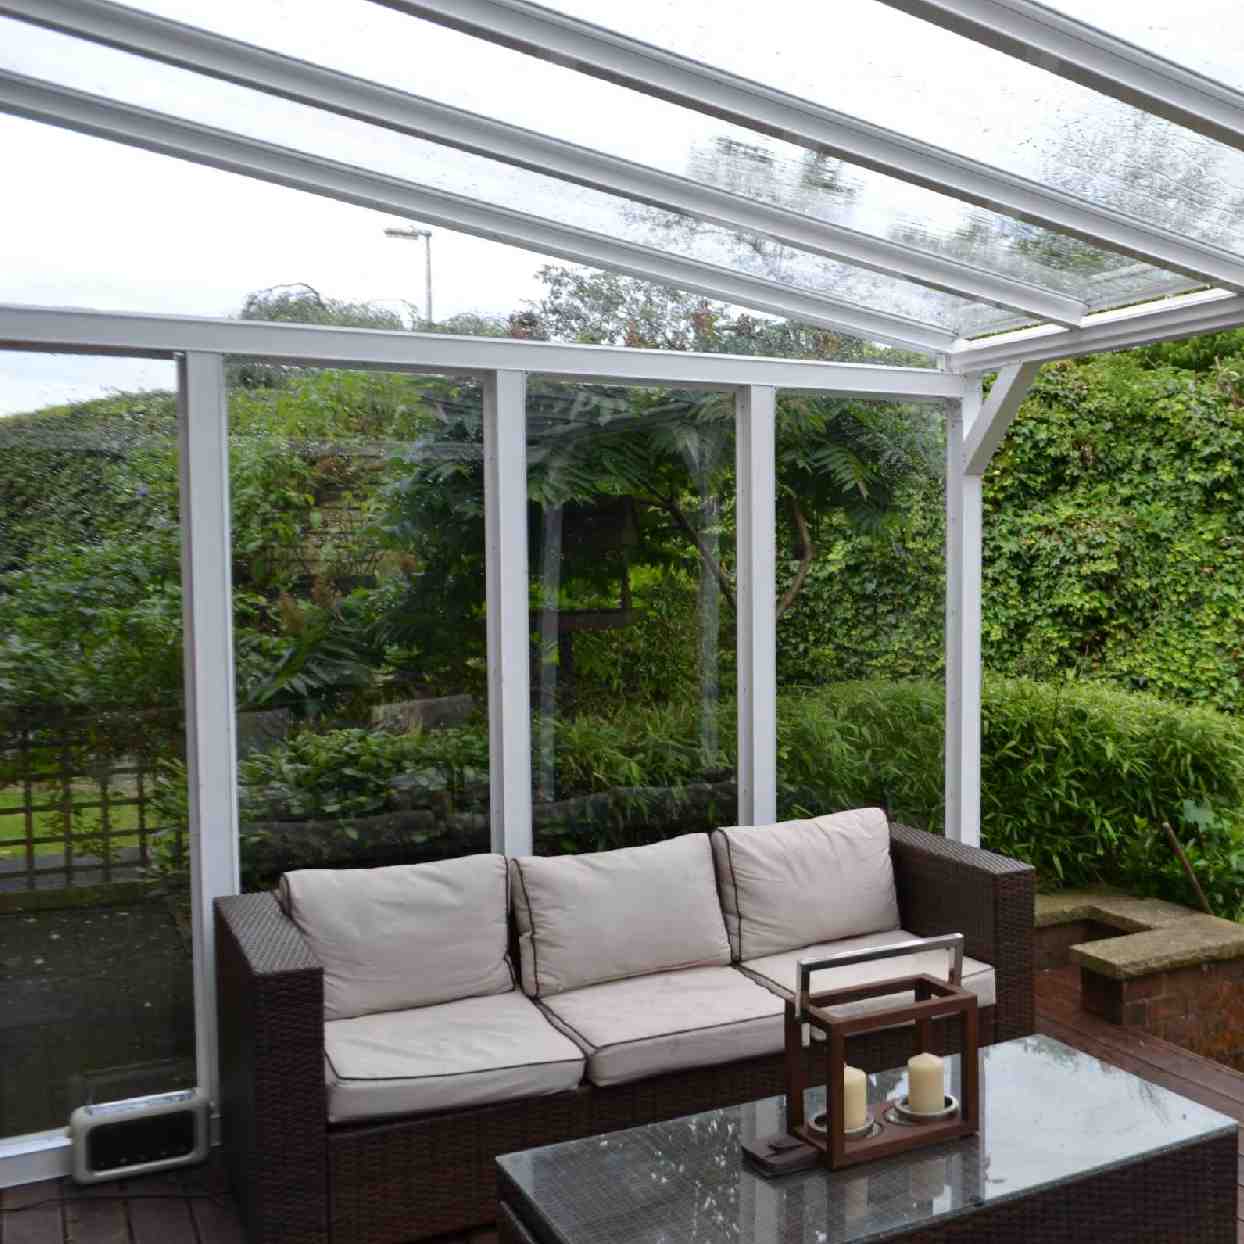 Buy Omega Verandah White with 16mm Polycarbonate Glazing - 9.5m (W) x 2.5m (P), (5) Supporting Posts online today